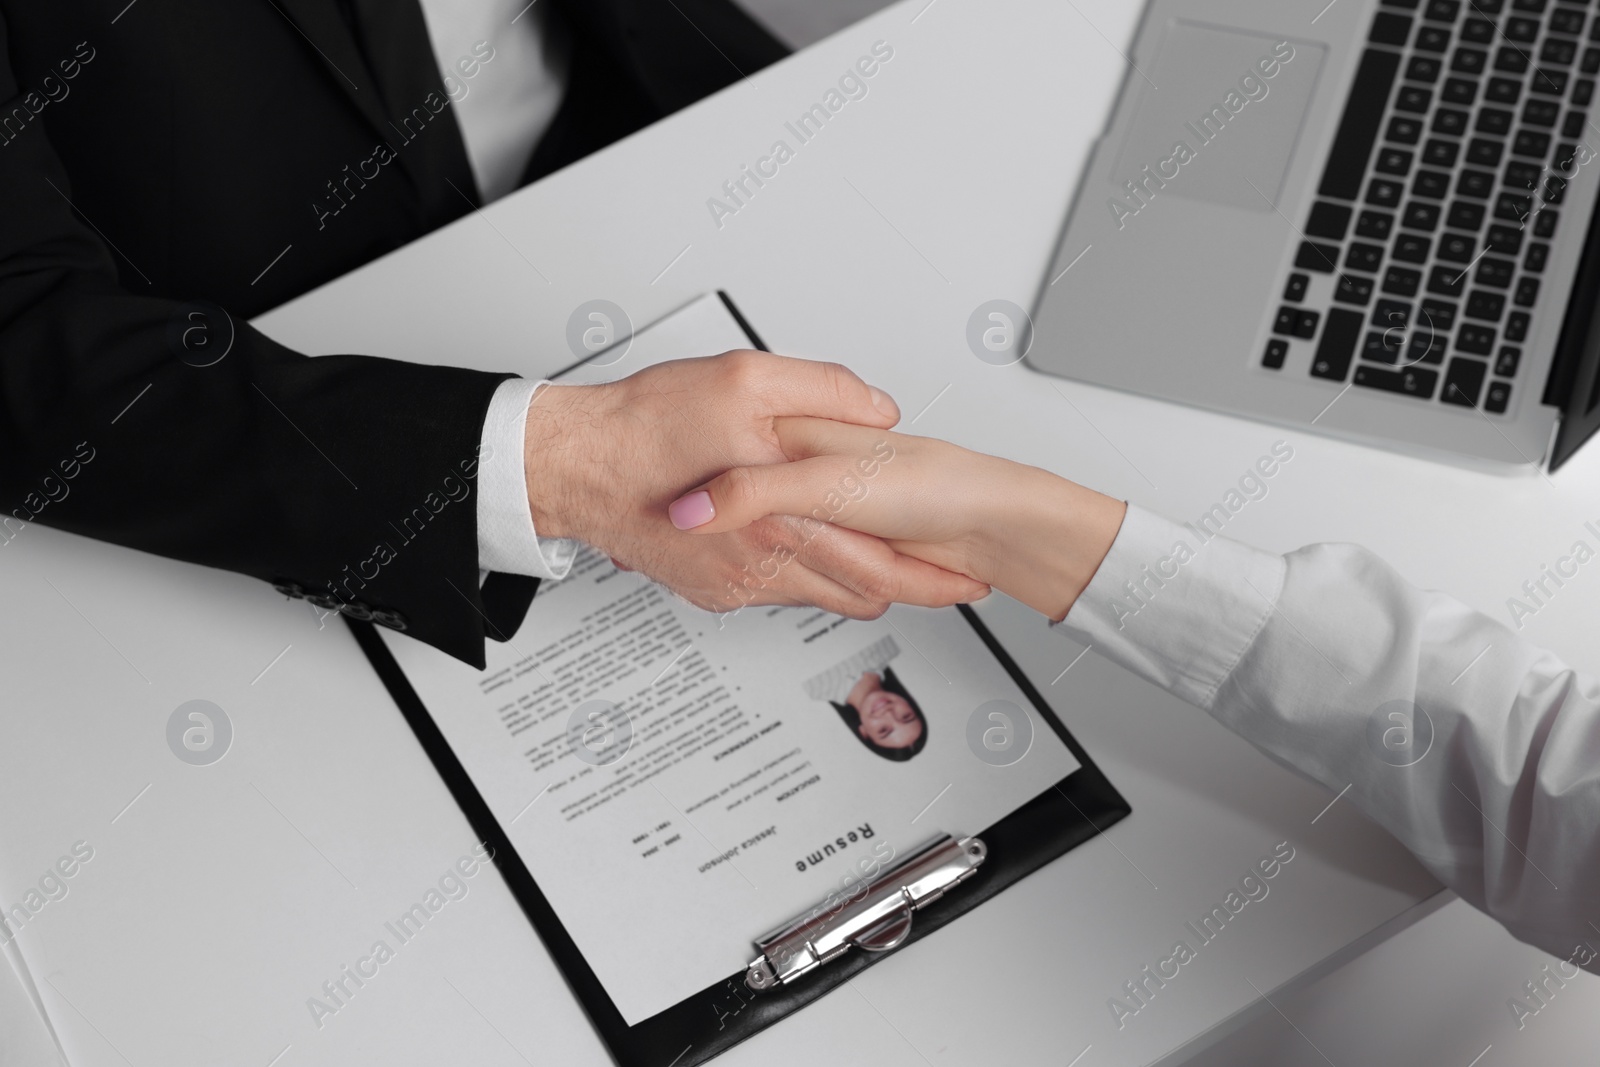 Photo of Human resources manager shaking hands with applicant during job interview in office, above view